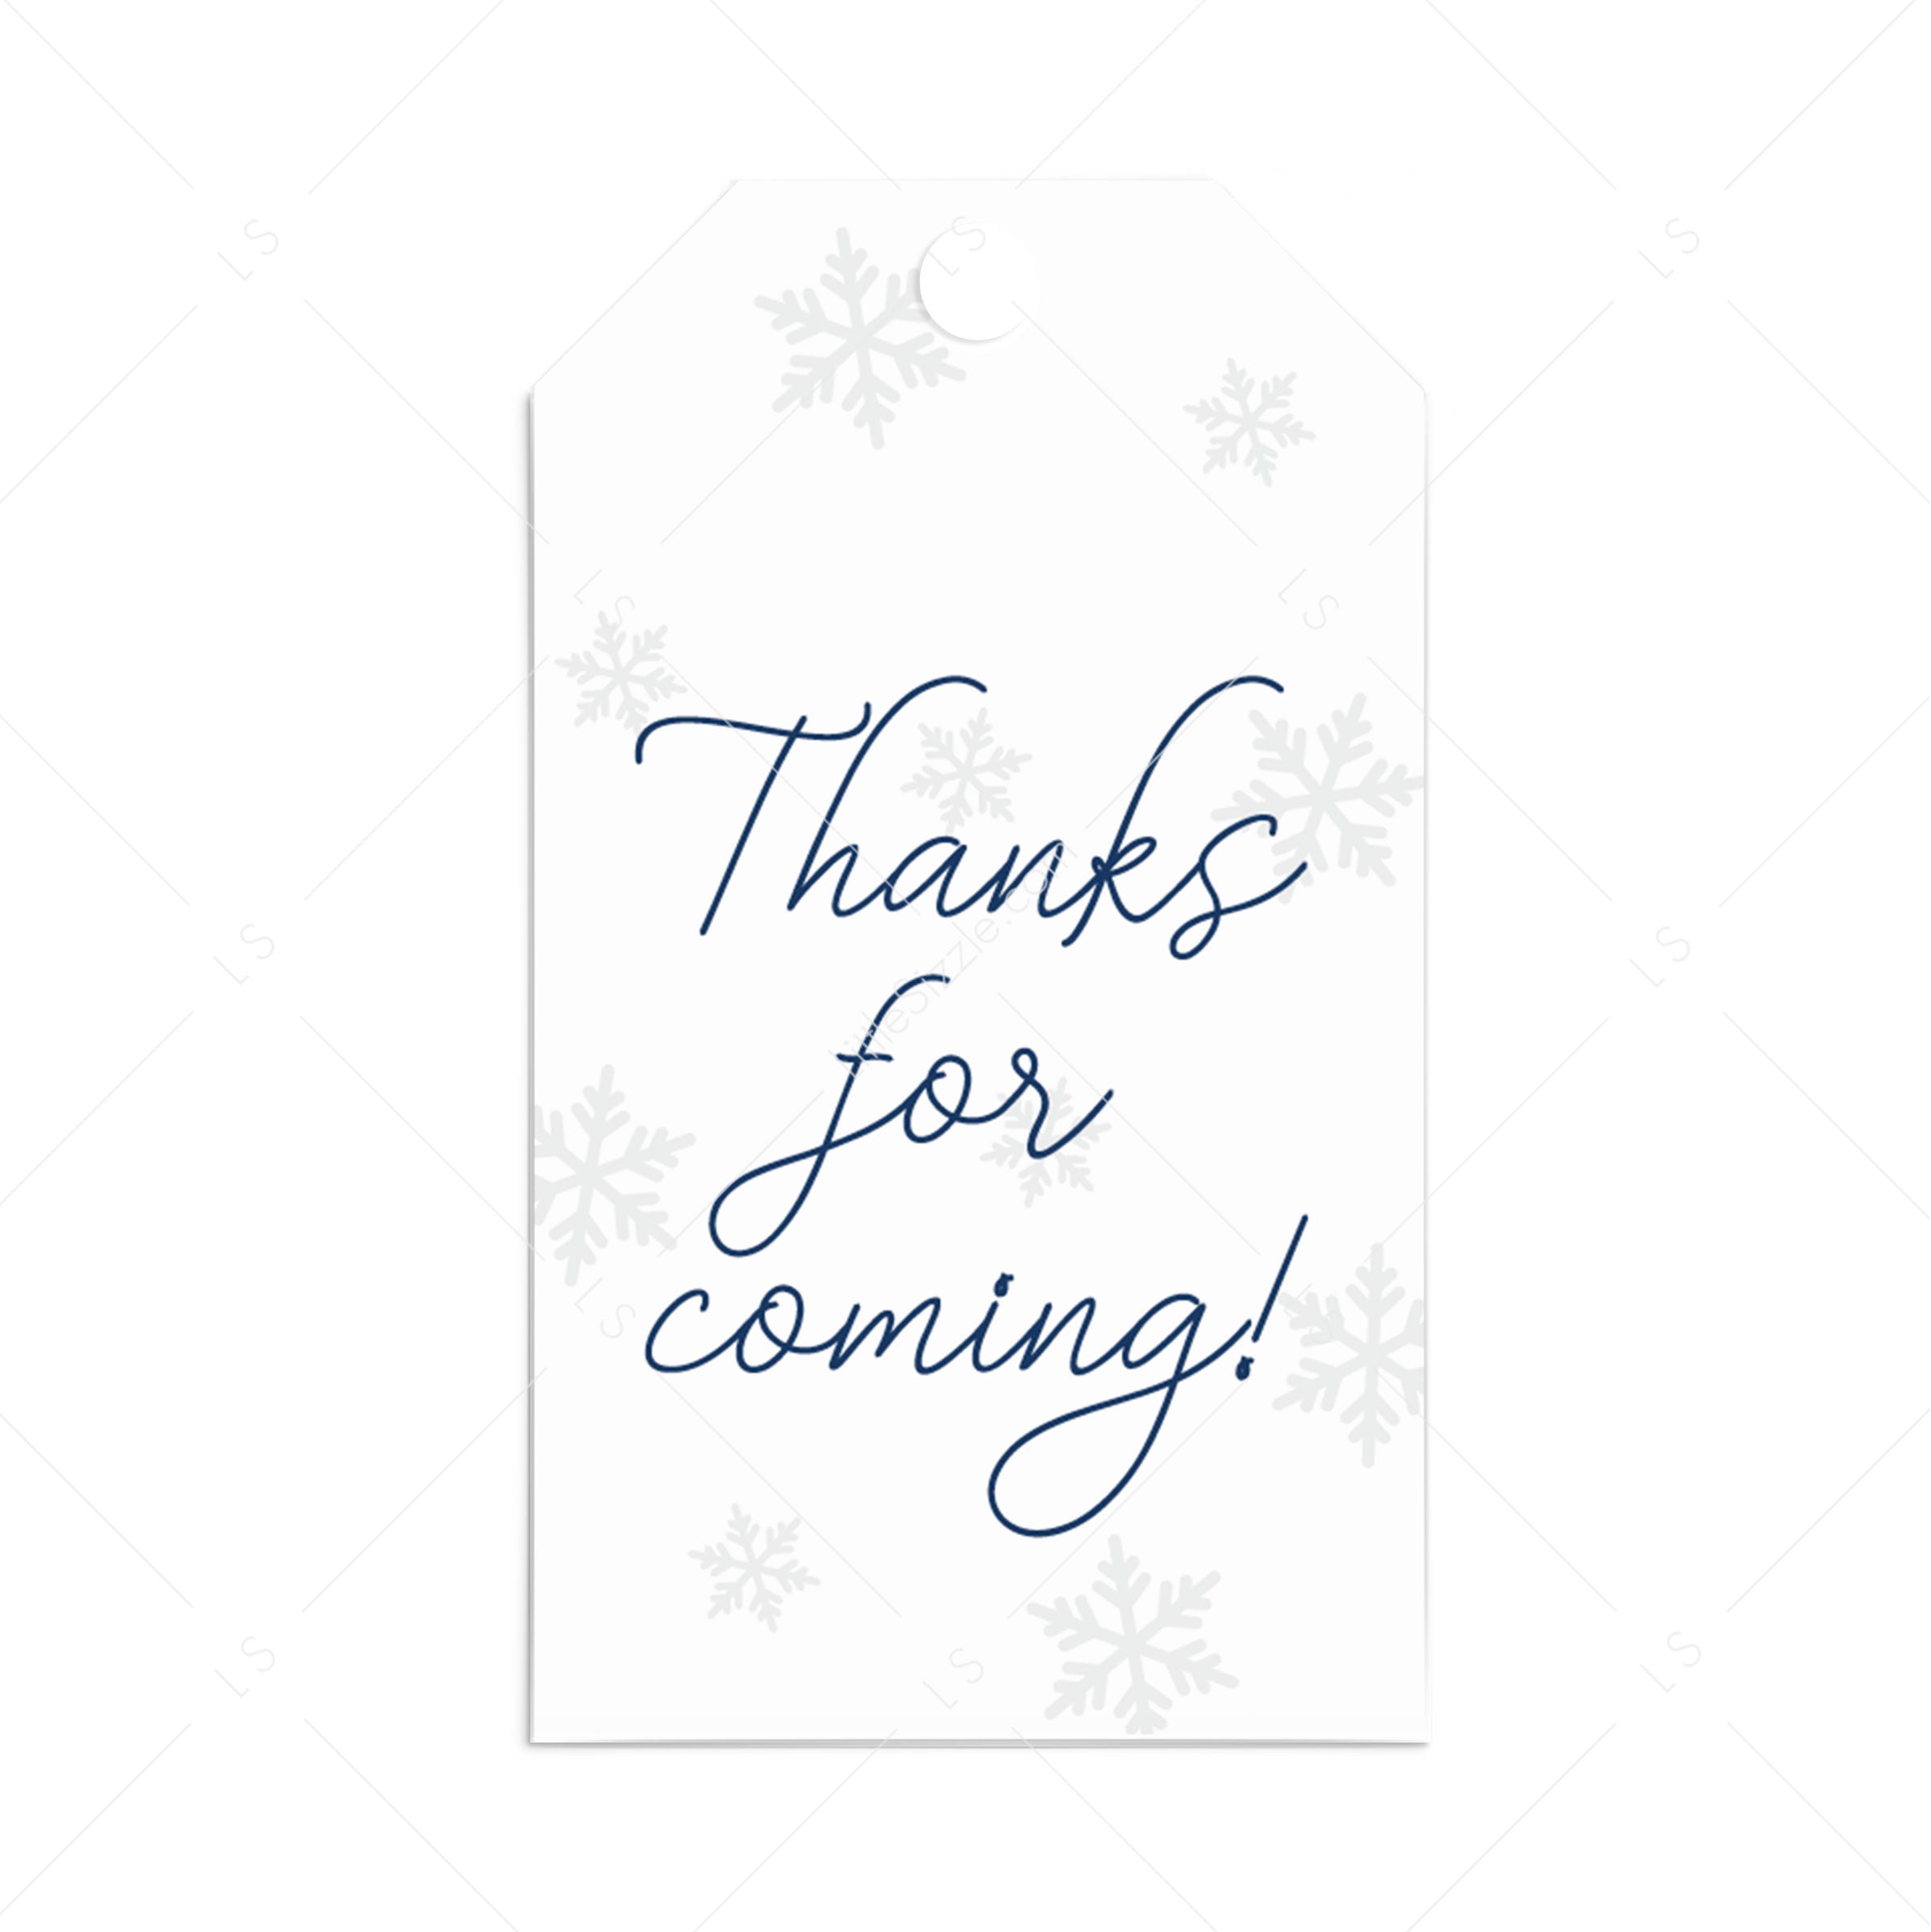 Printable thank you tags with snowflakes by LittleSizzle